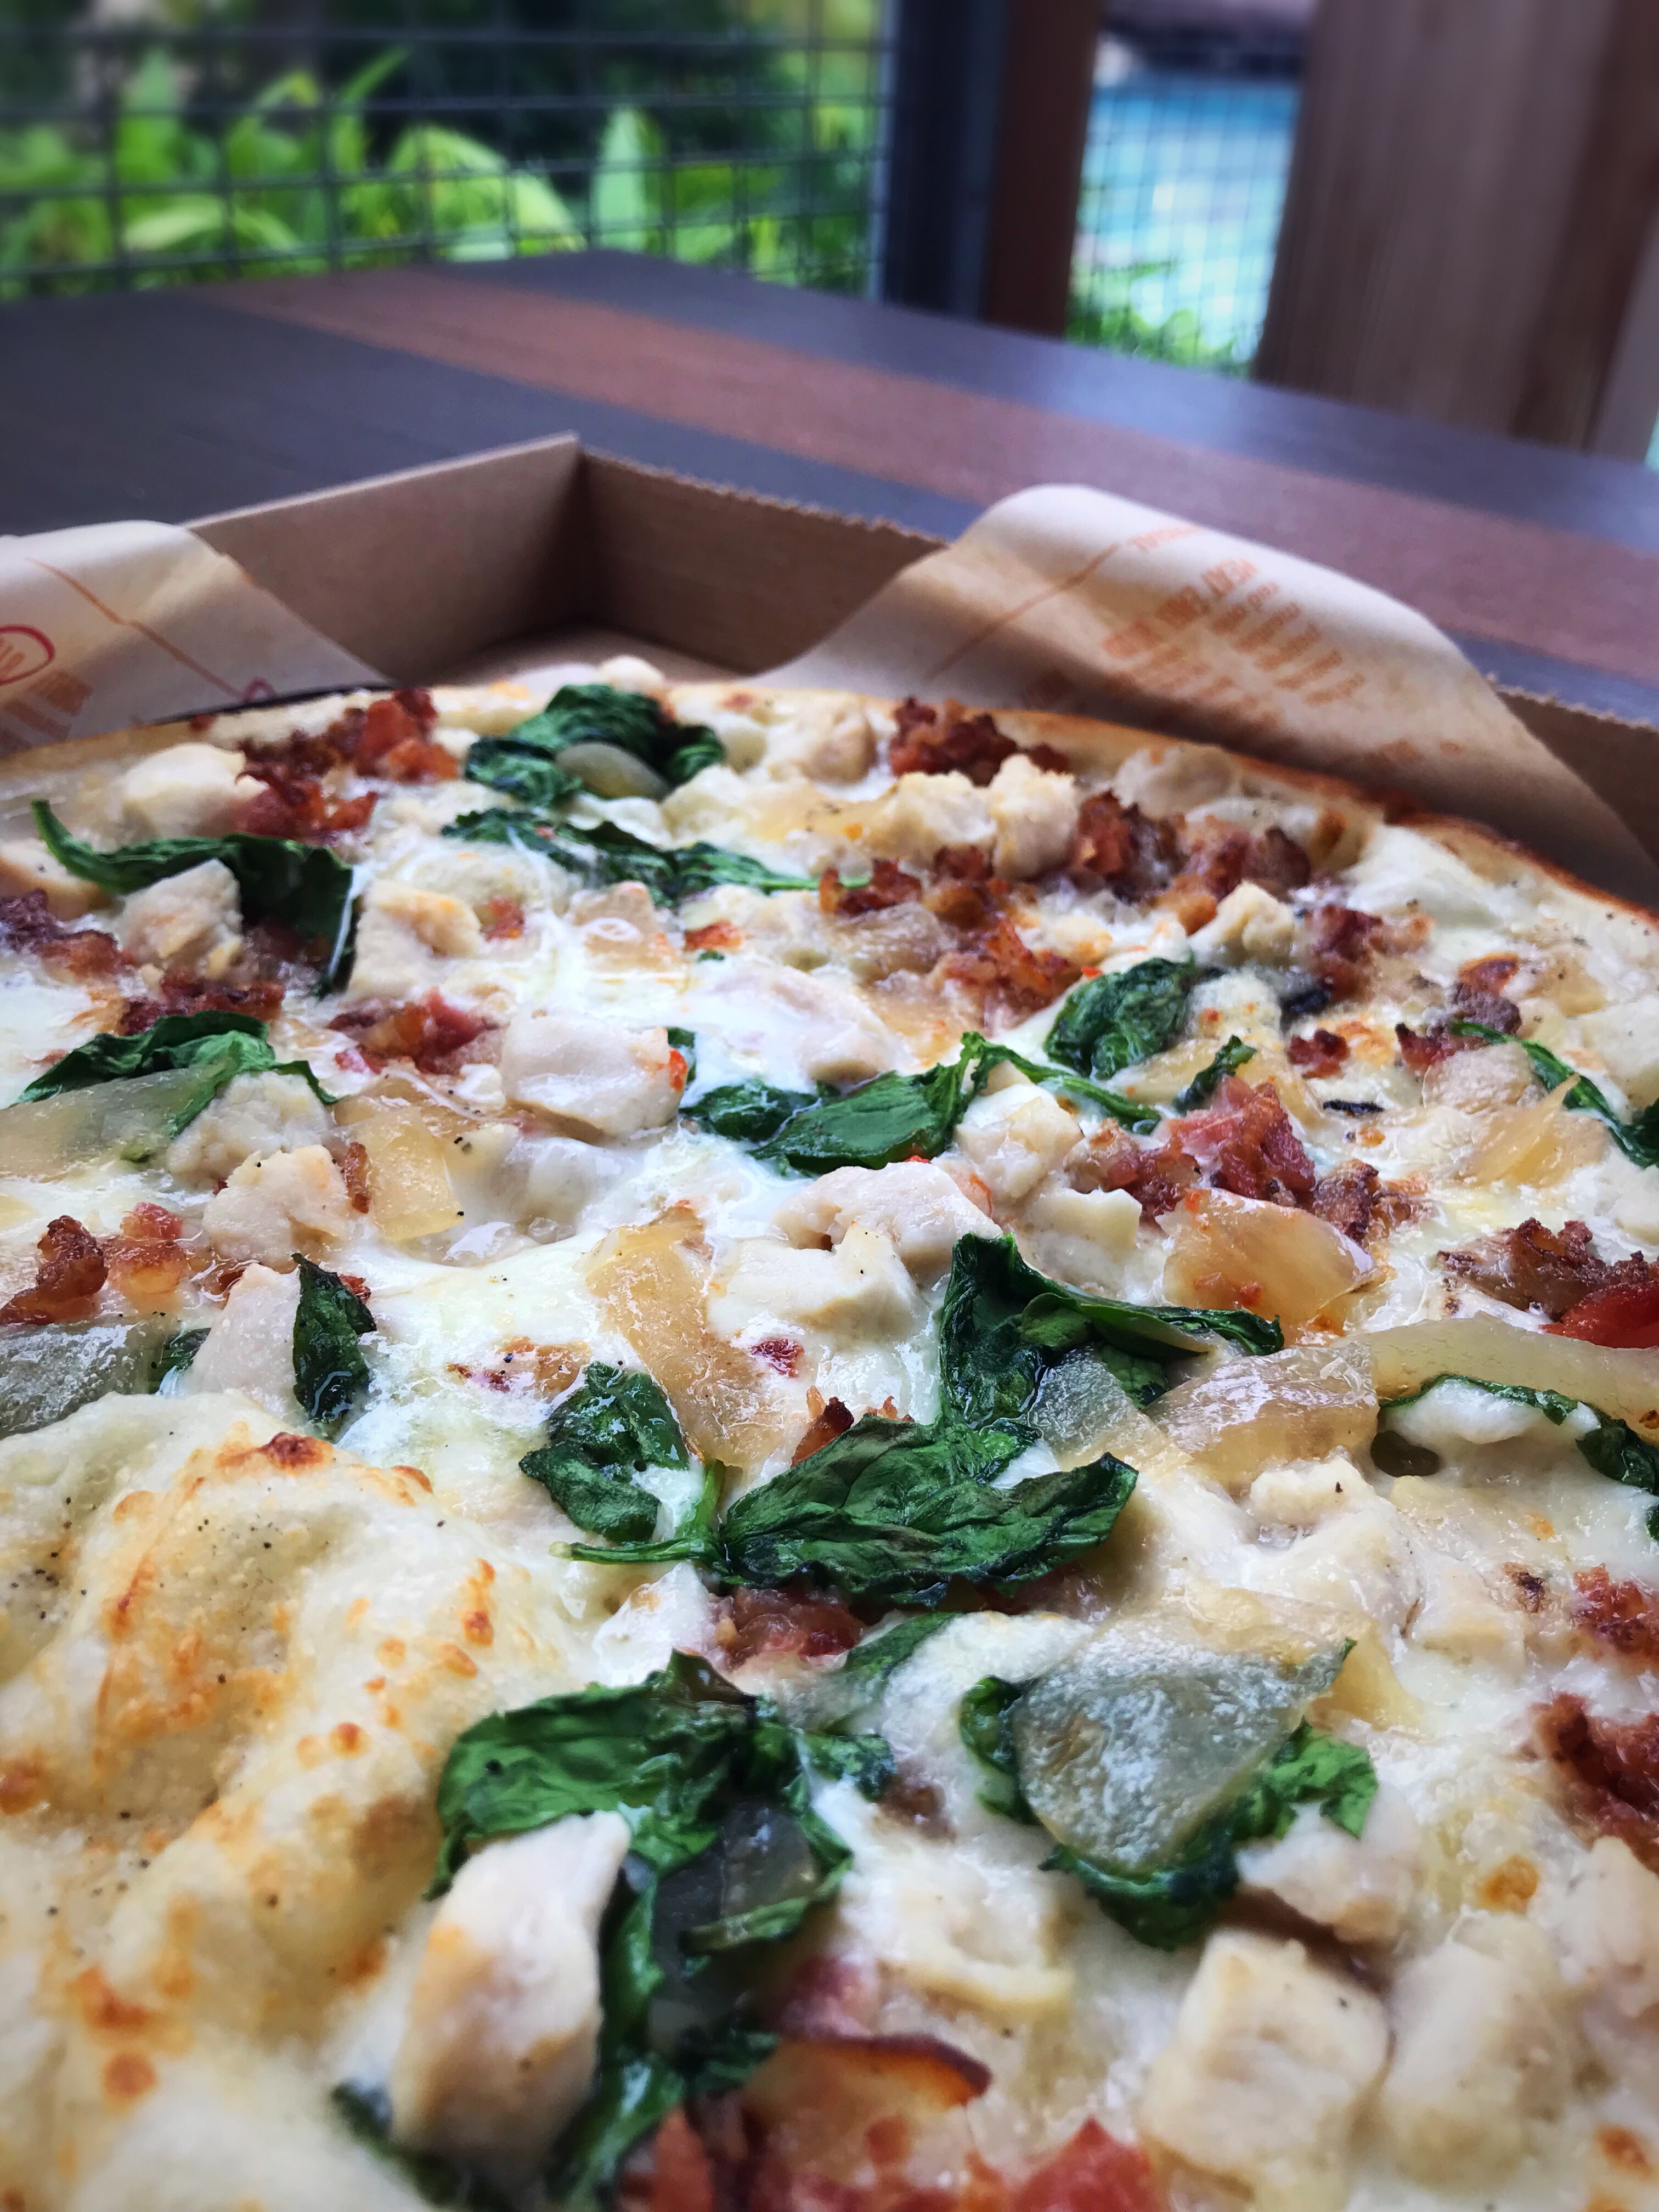 Regular crust, white sauce, mozzarella and gorgonzola cheeses, chicken and applewood bacon, sautéed onions and spinach